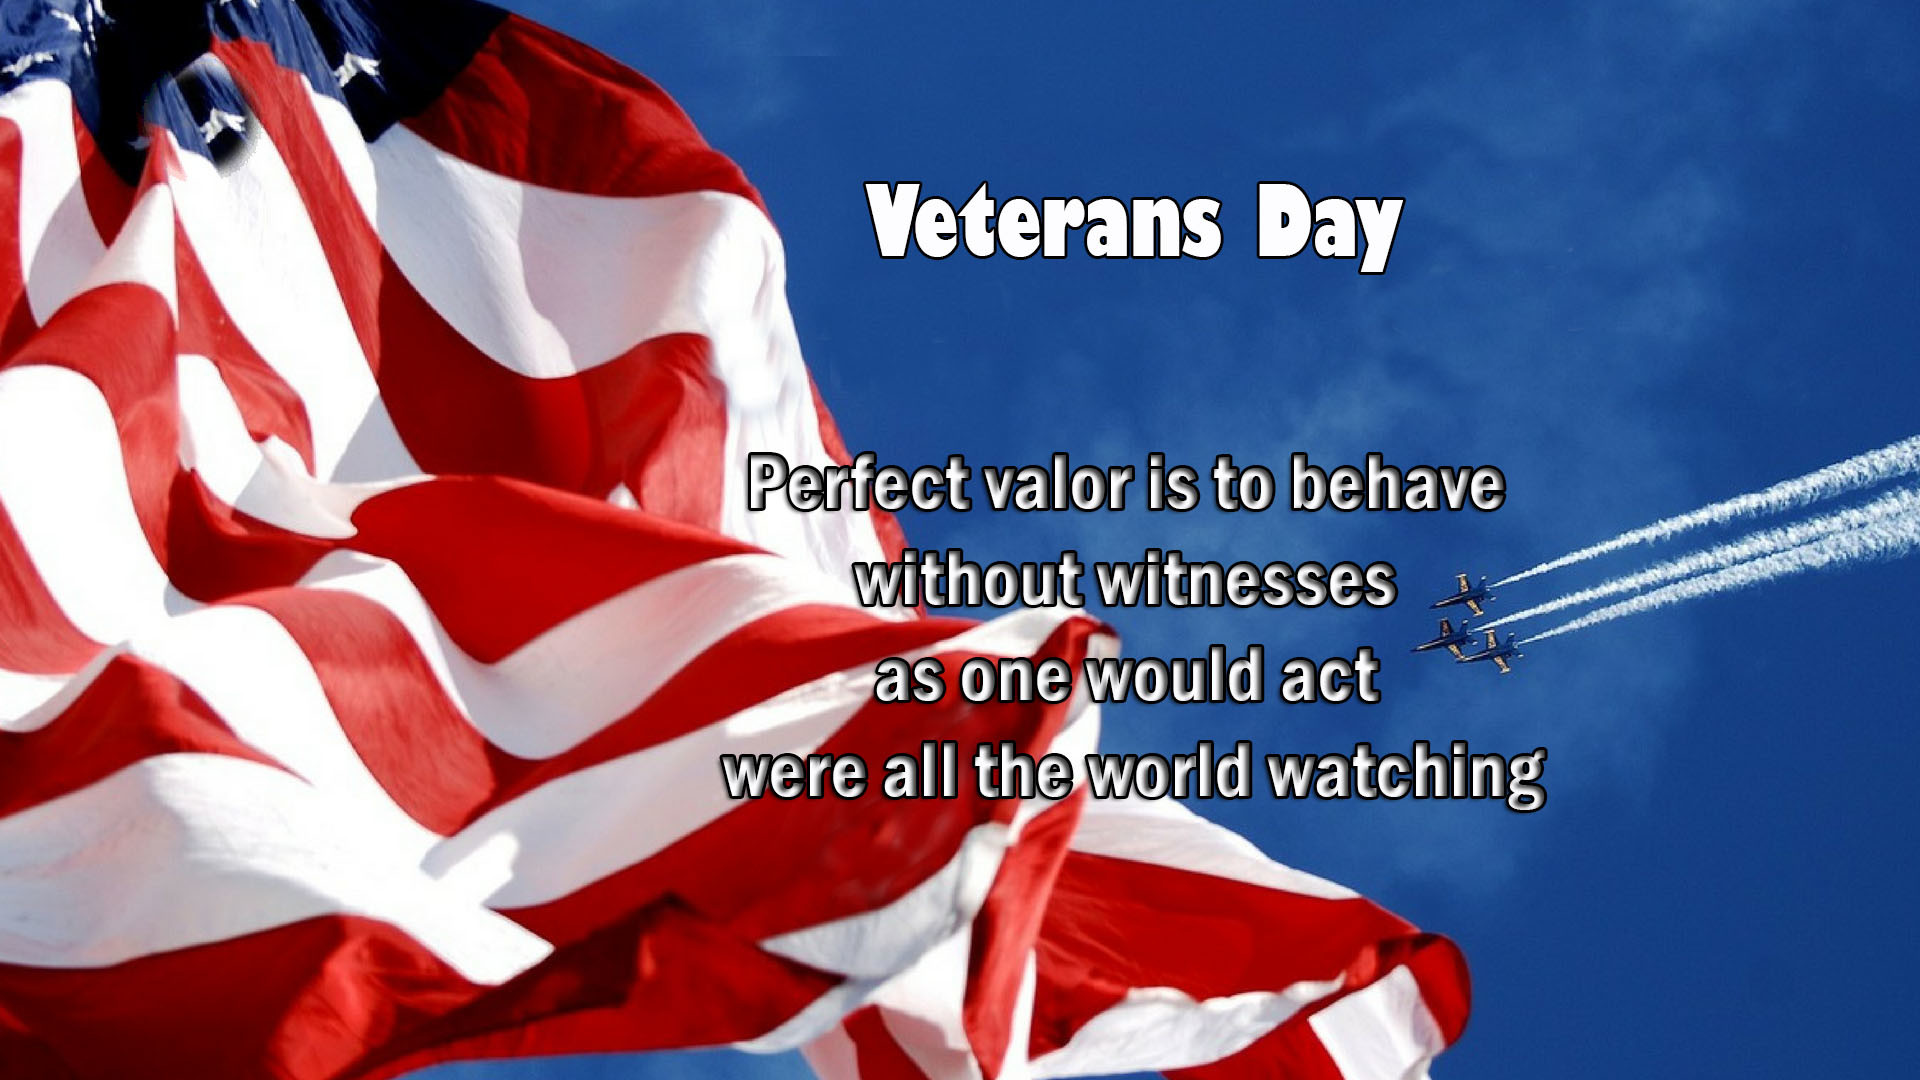 1920x1080 Veterans Day 2017 greeting image happy-veterans-day-wallpapers -images-posters-2017